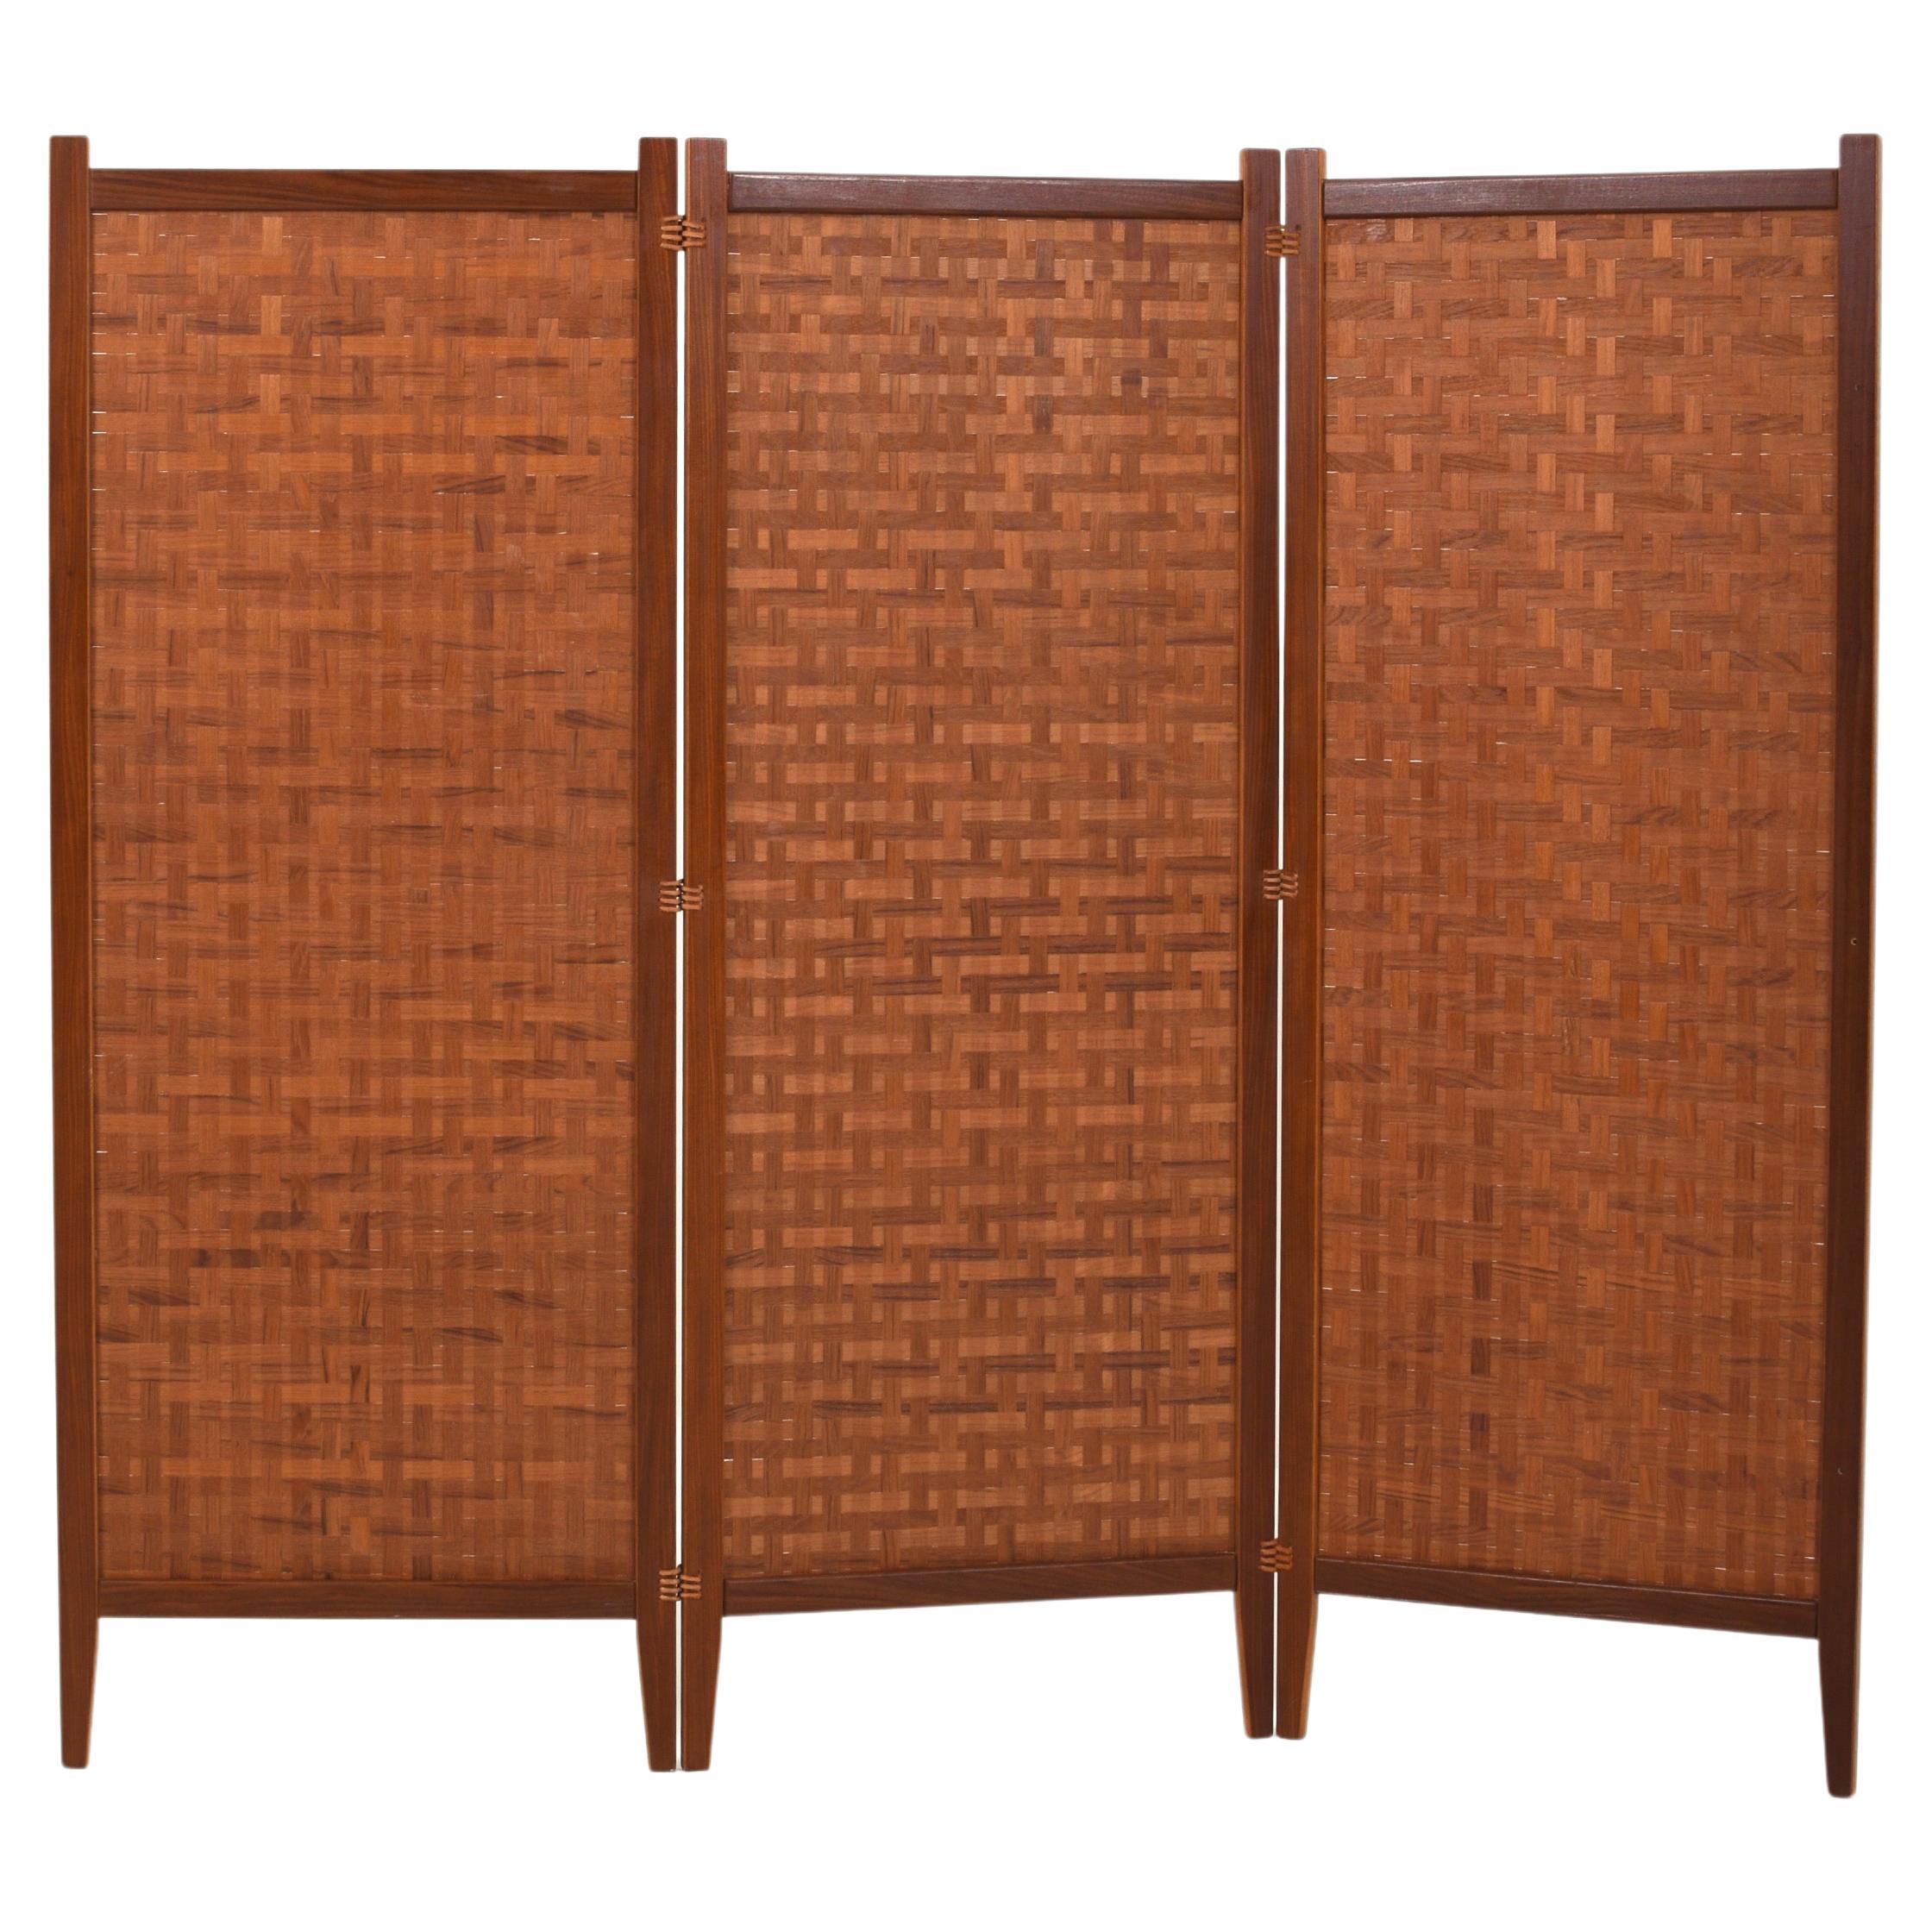 Teak and Leather Room Divider Spåna from Alberts Tibro, 1950s For Sale